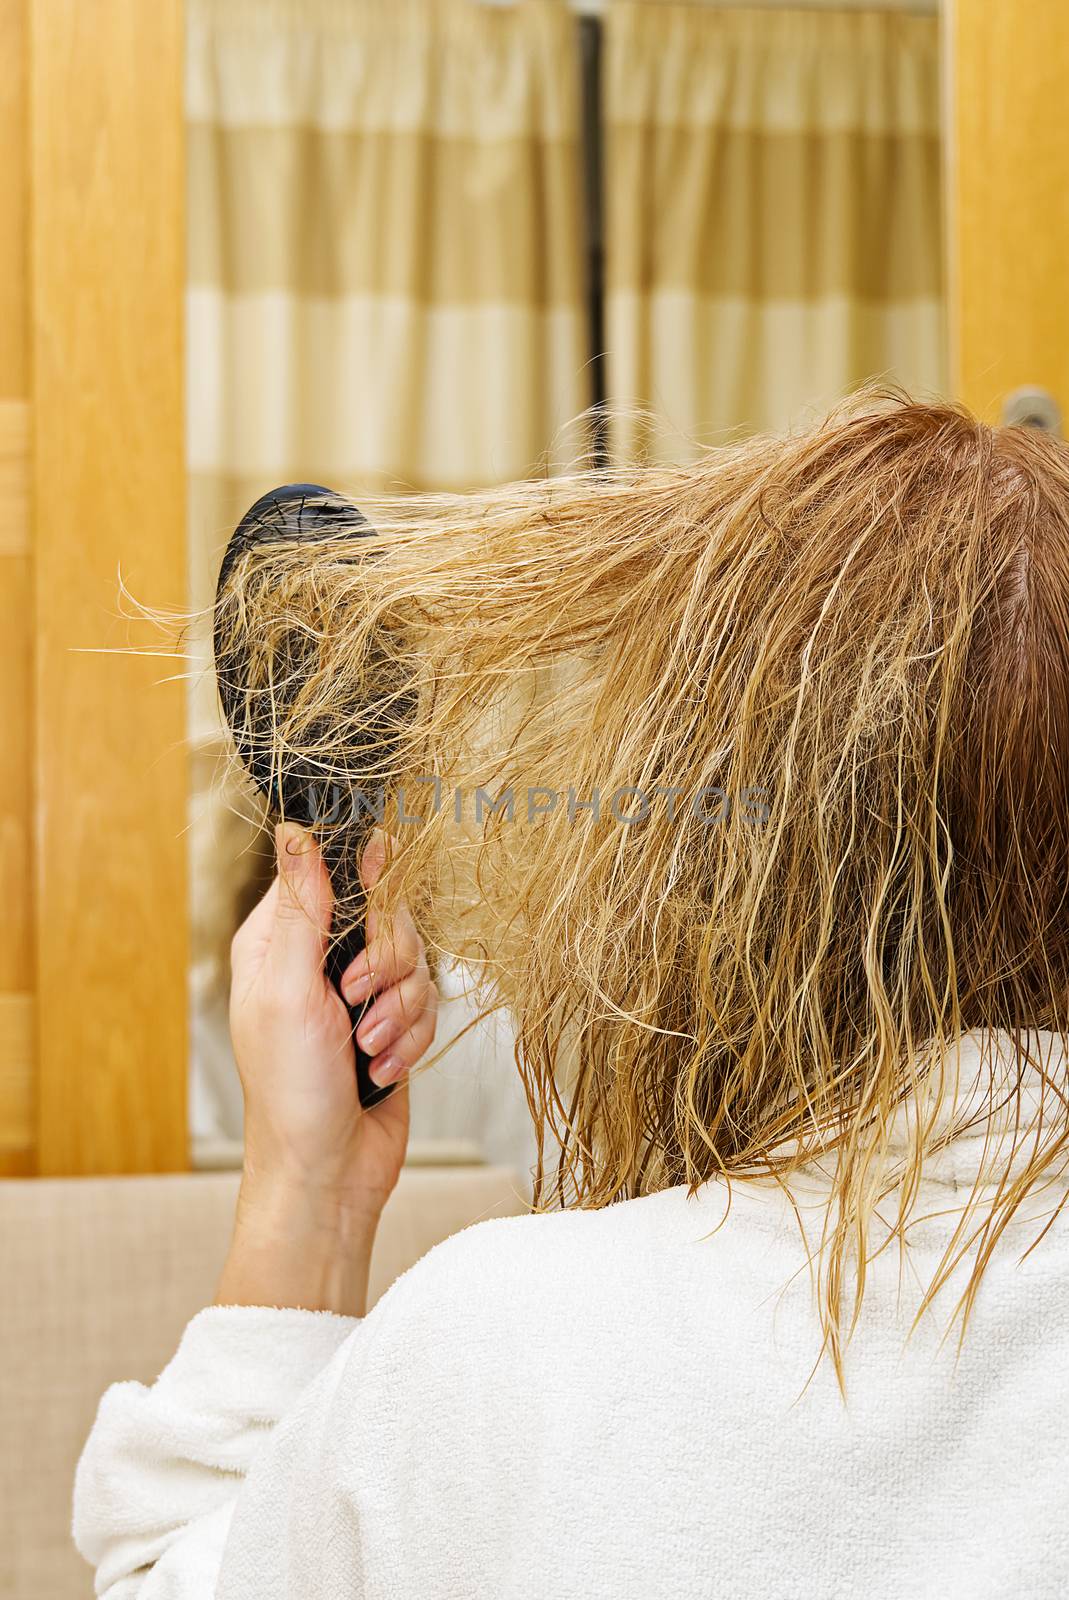 blond combing wet and tangled hair. Young woman combing her tangled hair after shower, close-up. by PhotoTime